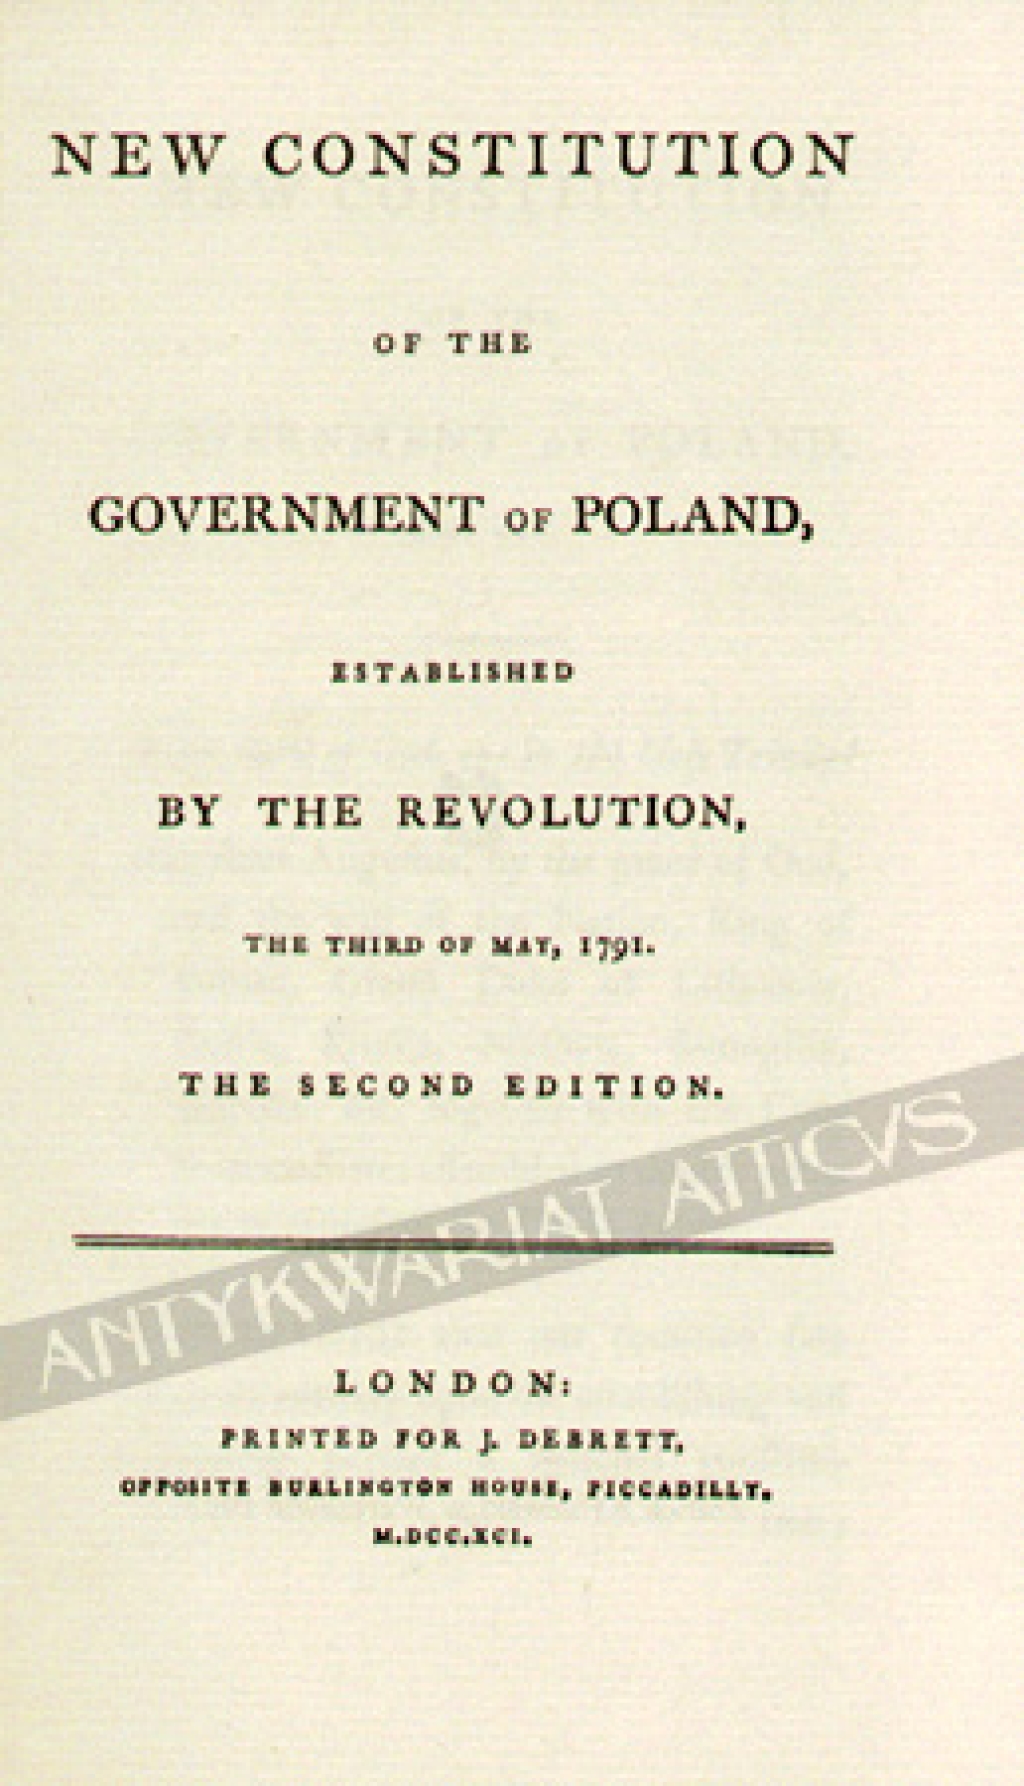 New Constitution of the Government of Poland, established by the Revolution the Third of May, 1791 [reprint]